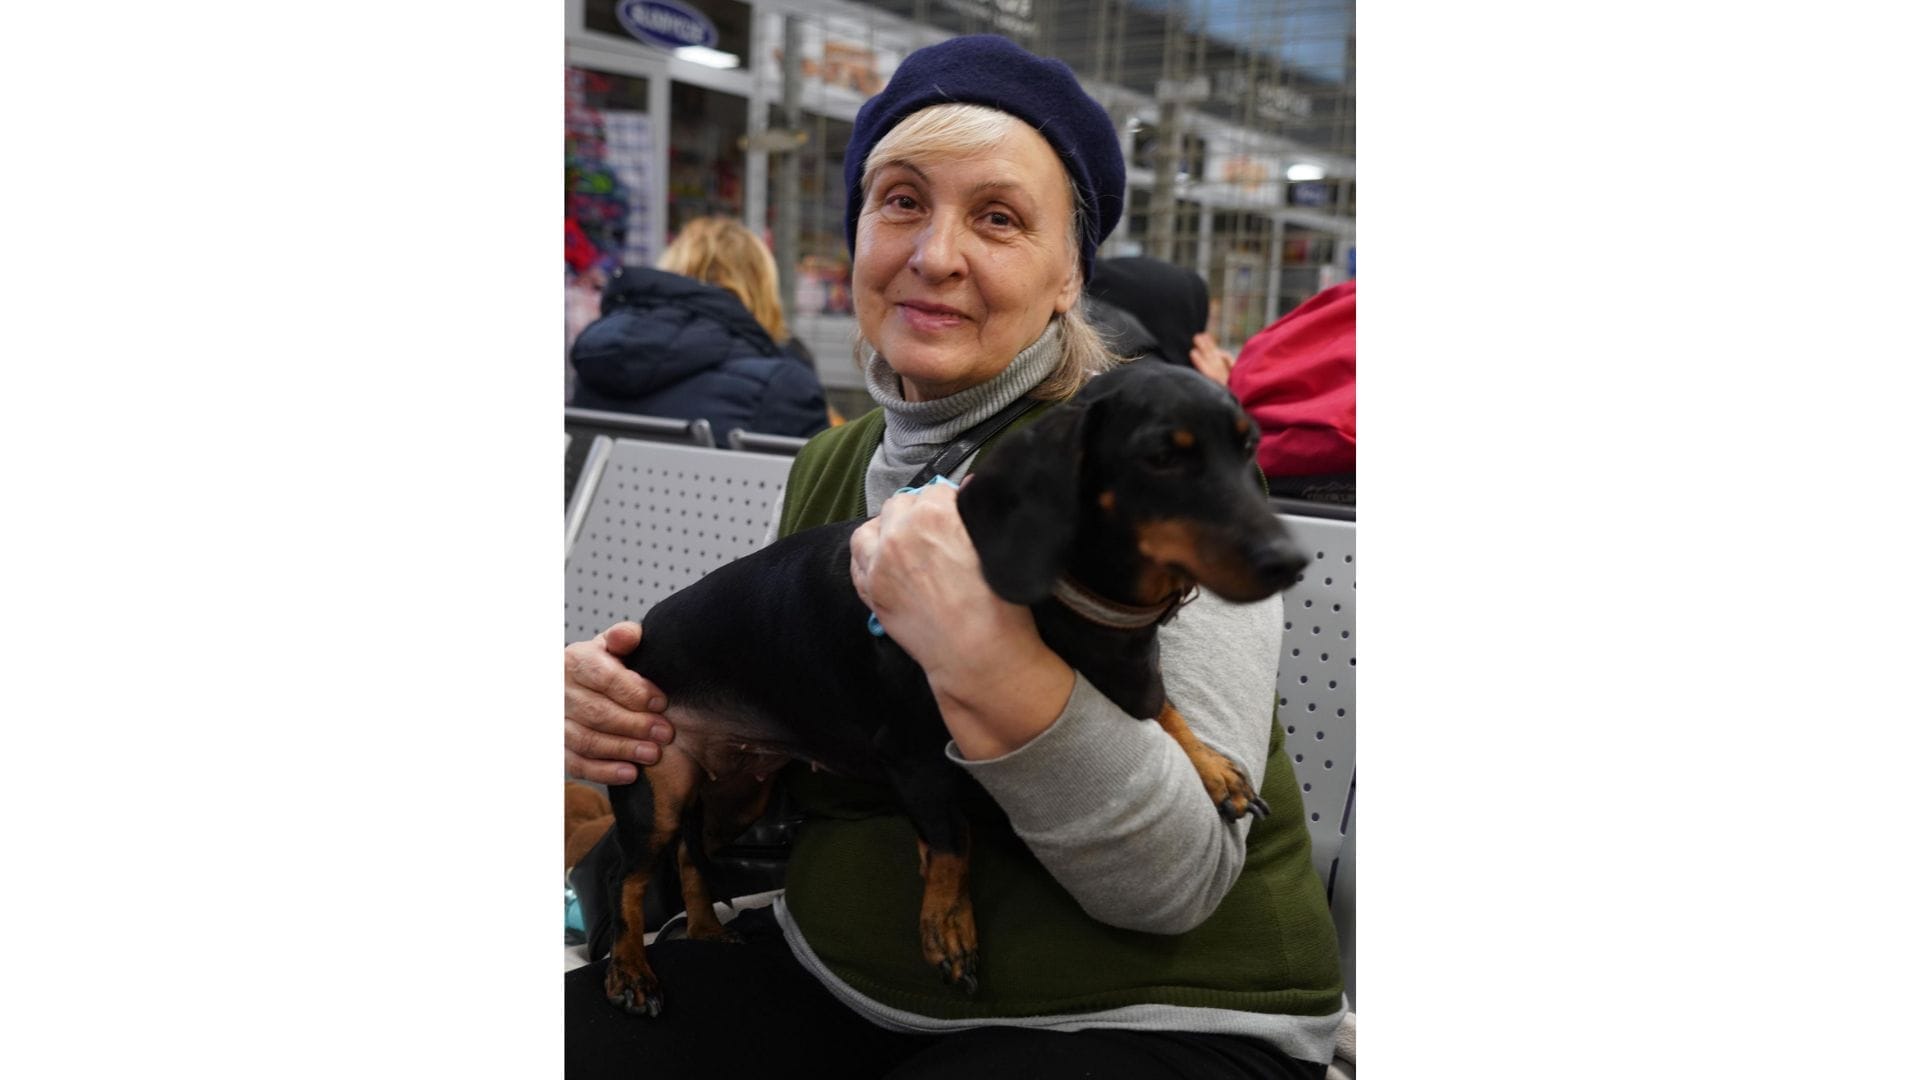 A woman holding a dog in a bus station in Poland.